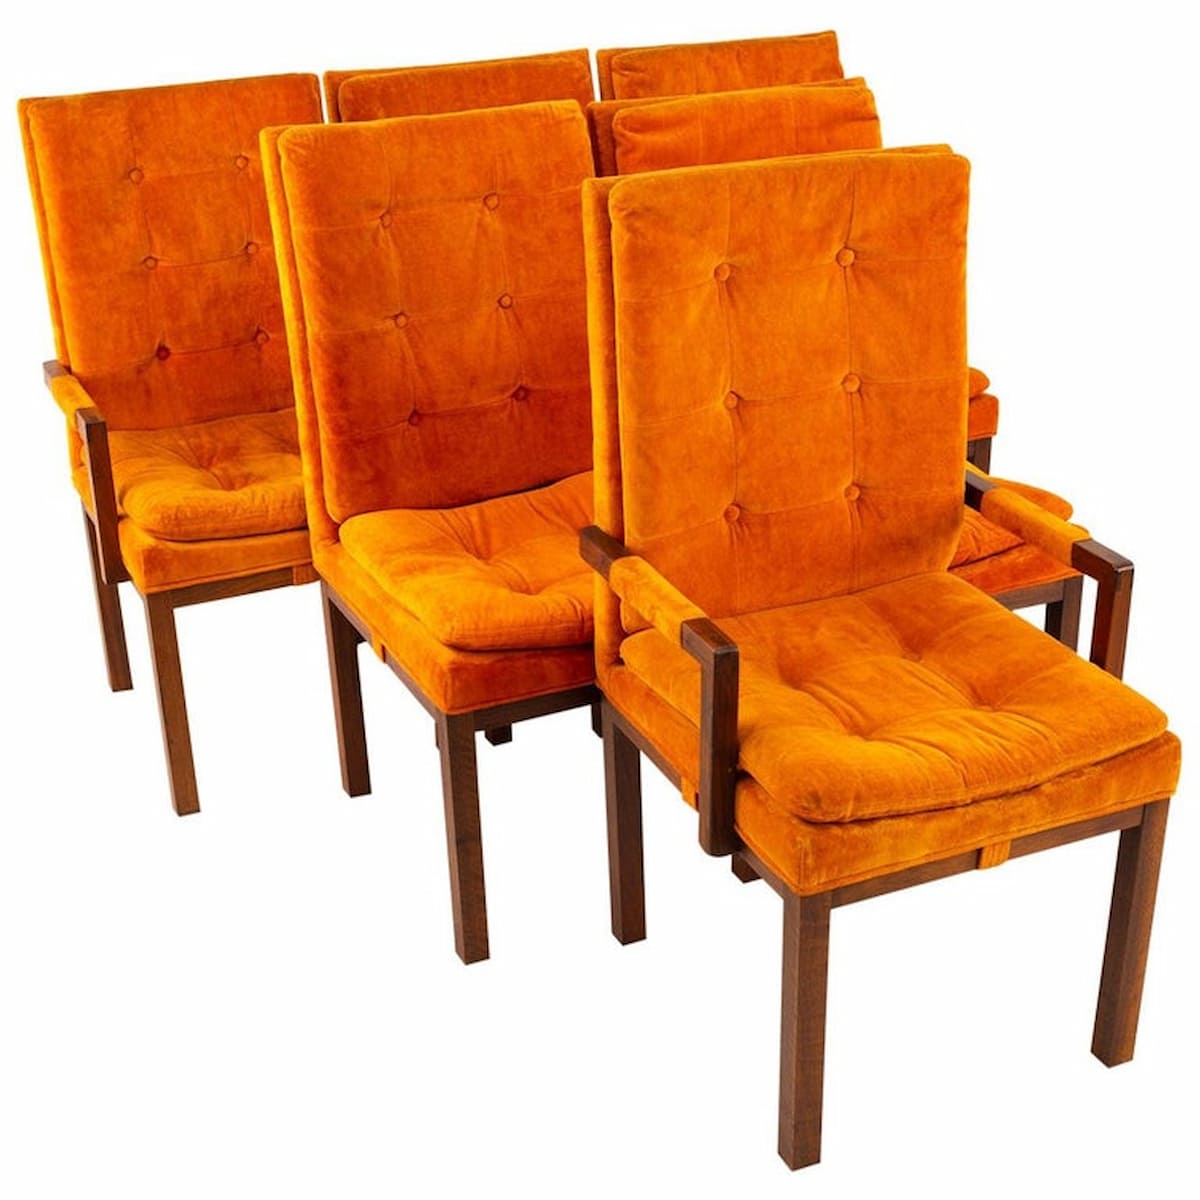 Milo Baughman Style Dillingham Orange and Walnut Upholstered Dining Chairs - Set of 6